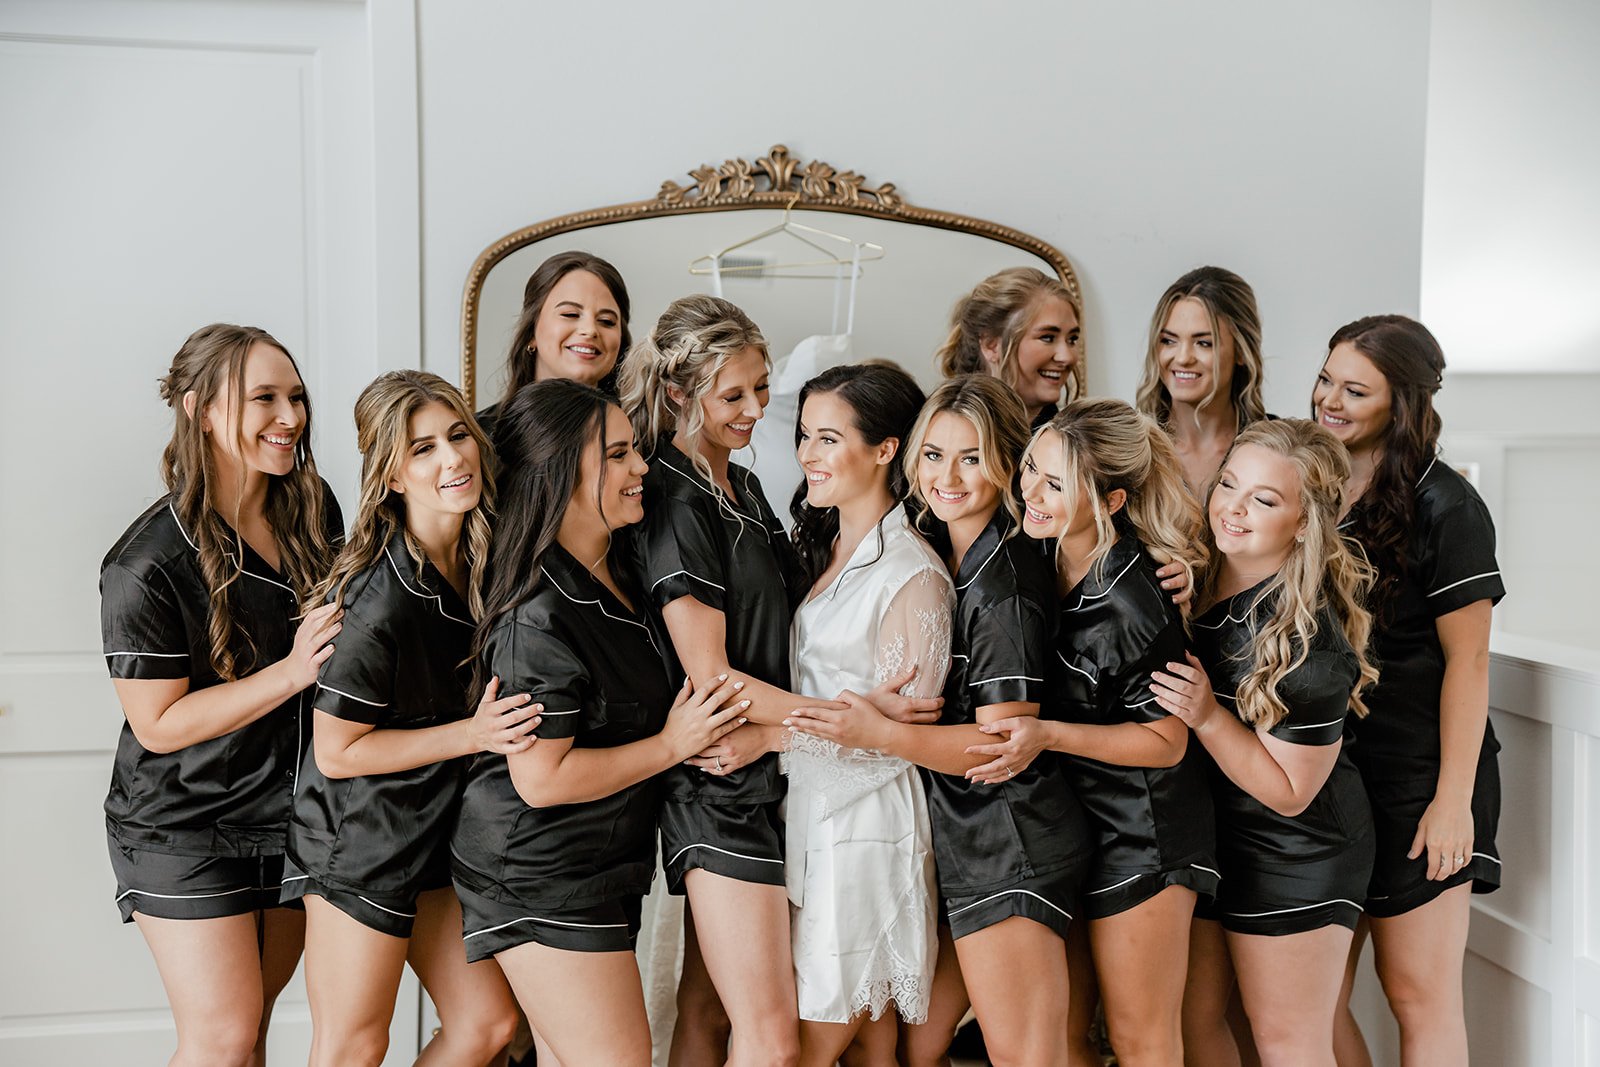 A bride laughs with her bridesmaids. They all are wearing black pajamas and the bride is in a white silky robe.